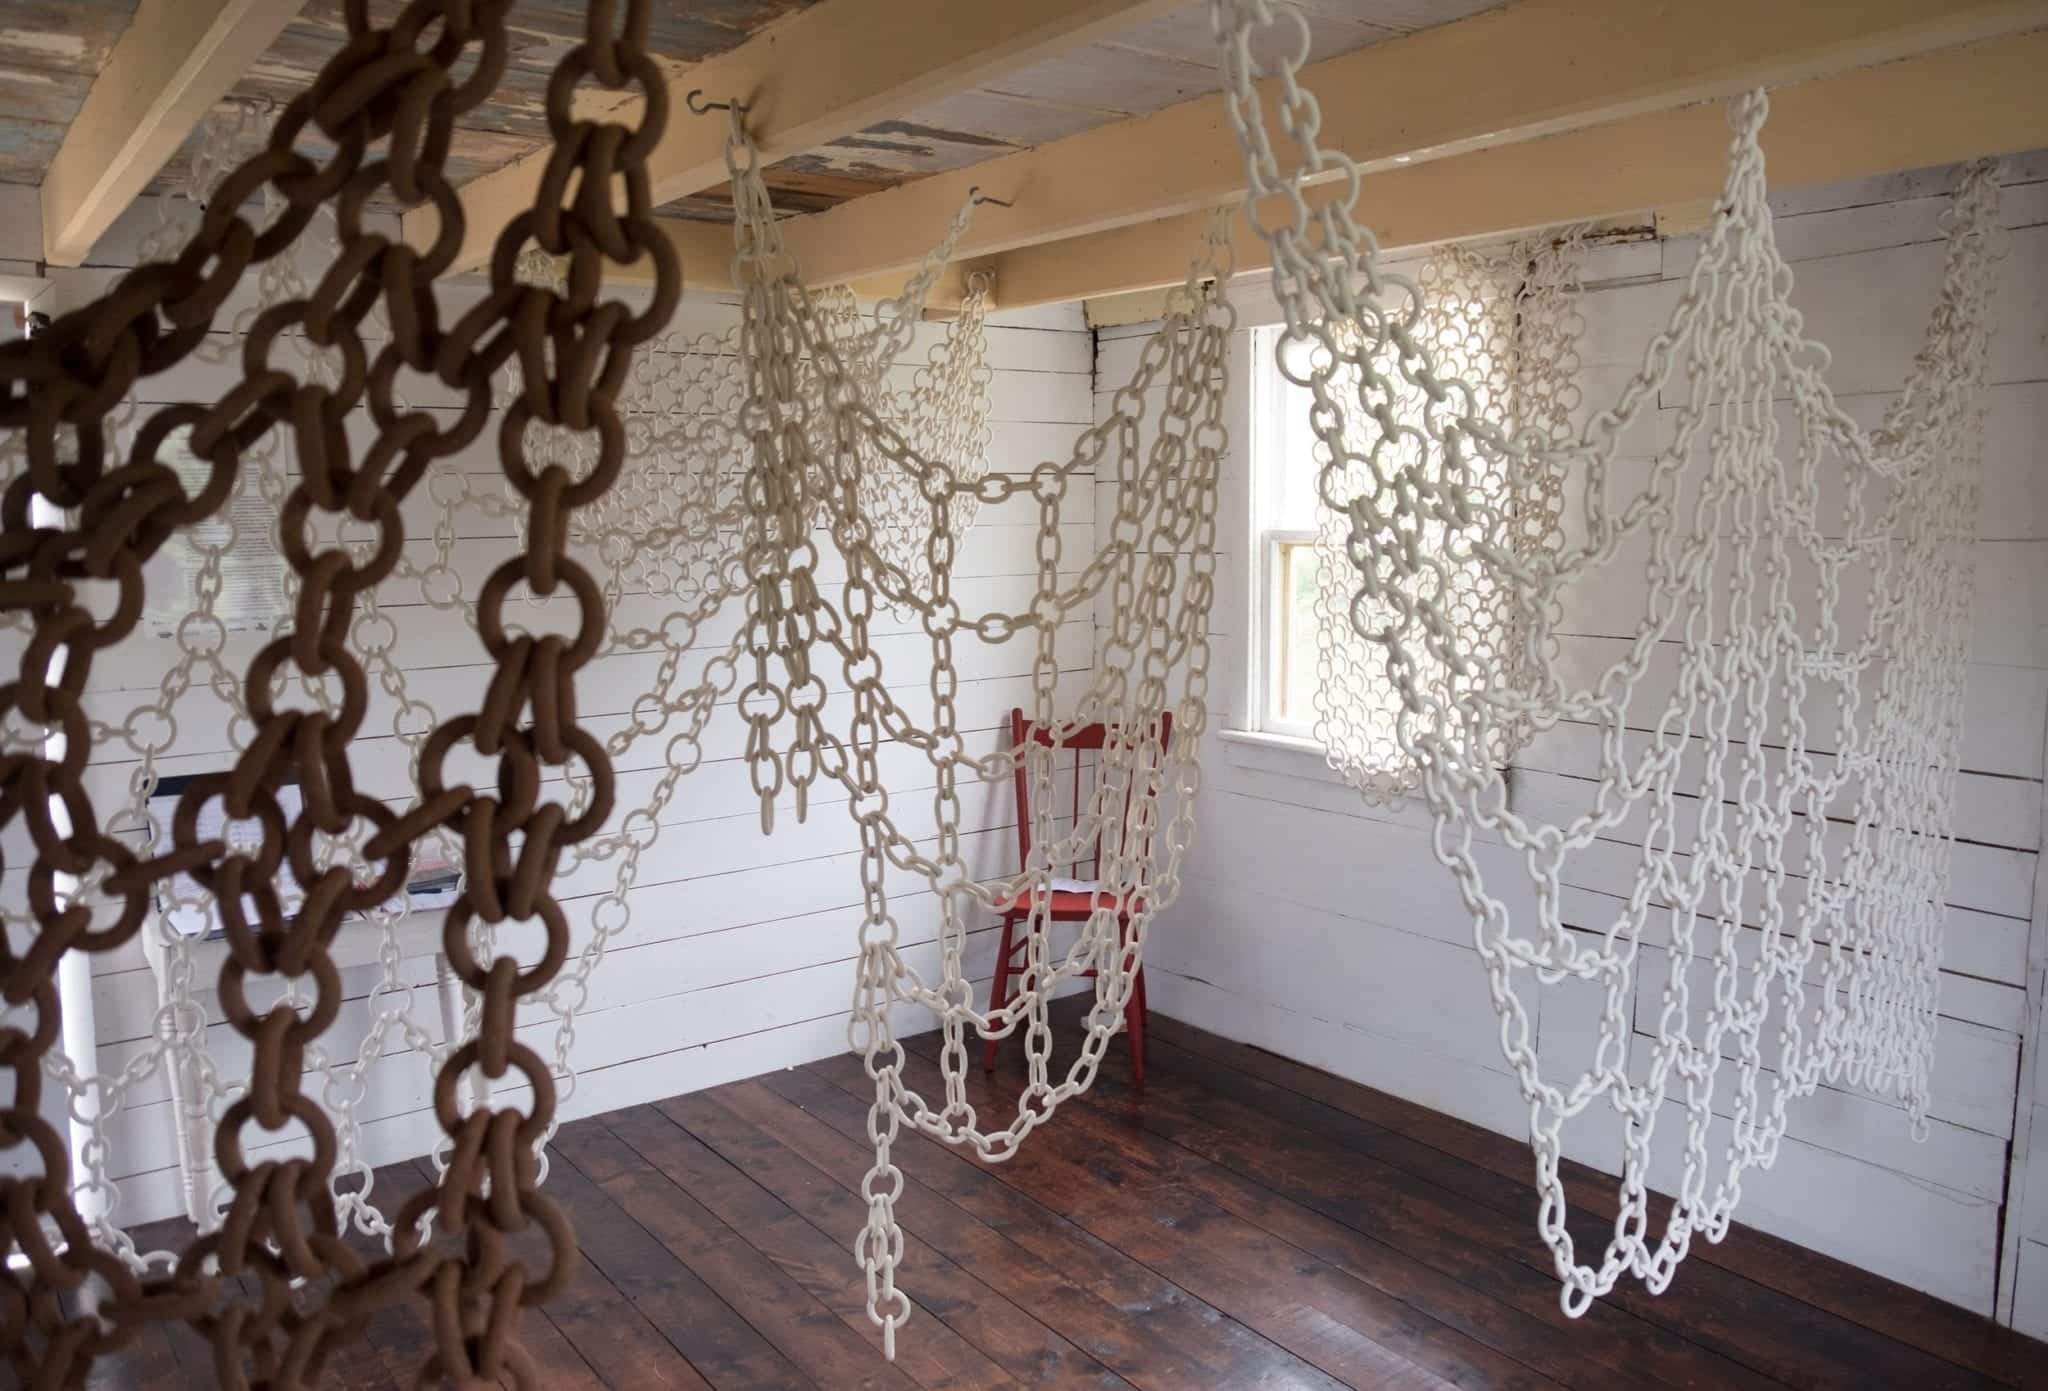 Brown, beige, and white chains made from clay hang in a white room,